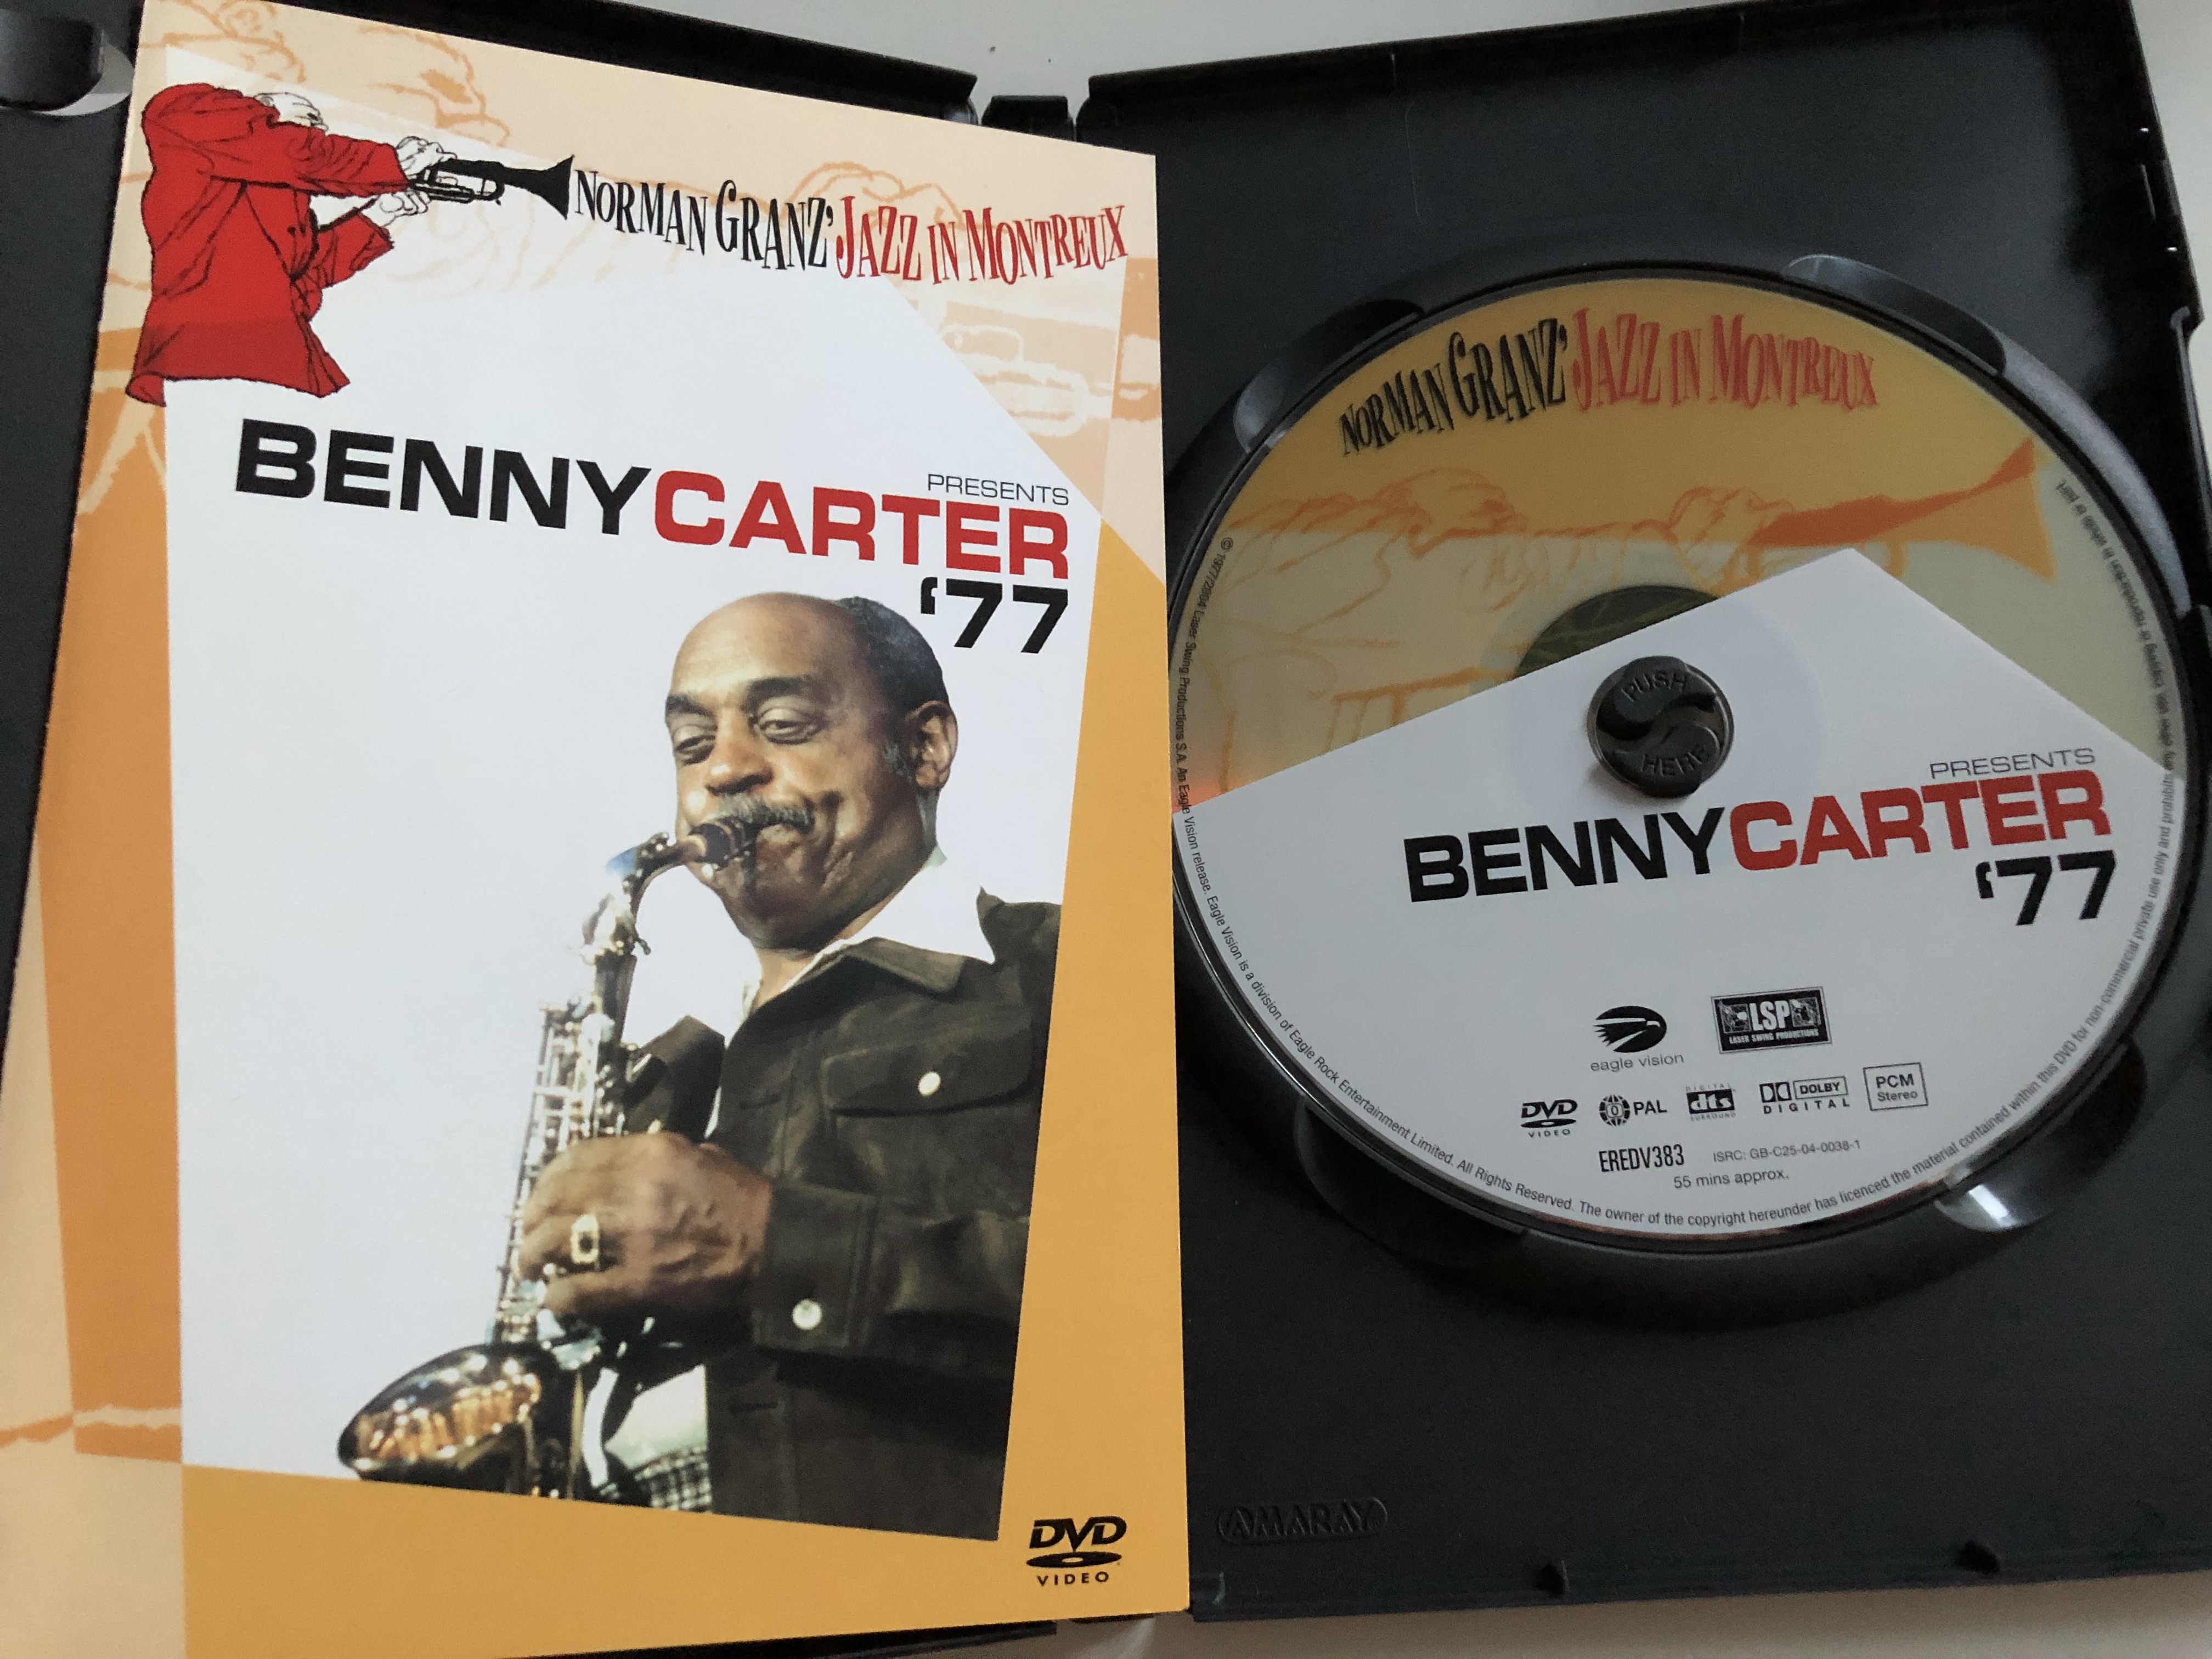 benny-carter-77-dvd-2004-norman-granz-jazz-in-montreux-three-little-words-in-a-mellow-tone-body-soul-here-s-that-rainy-day-restored-and-remastered-in-dolby-digital-5.1-dts-surround-3-.jpg